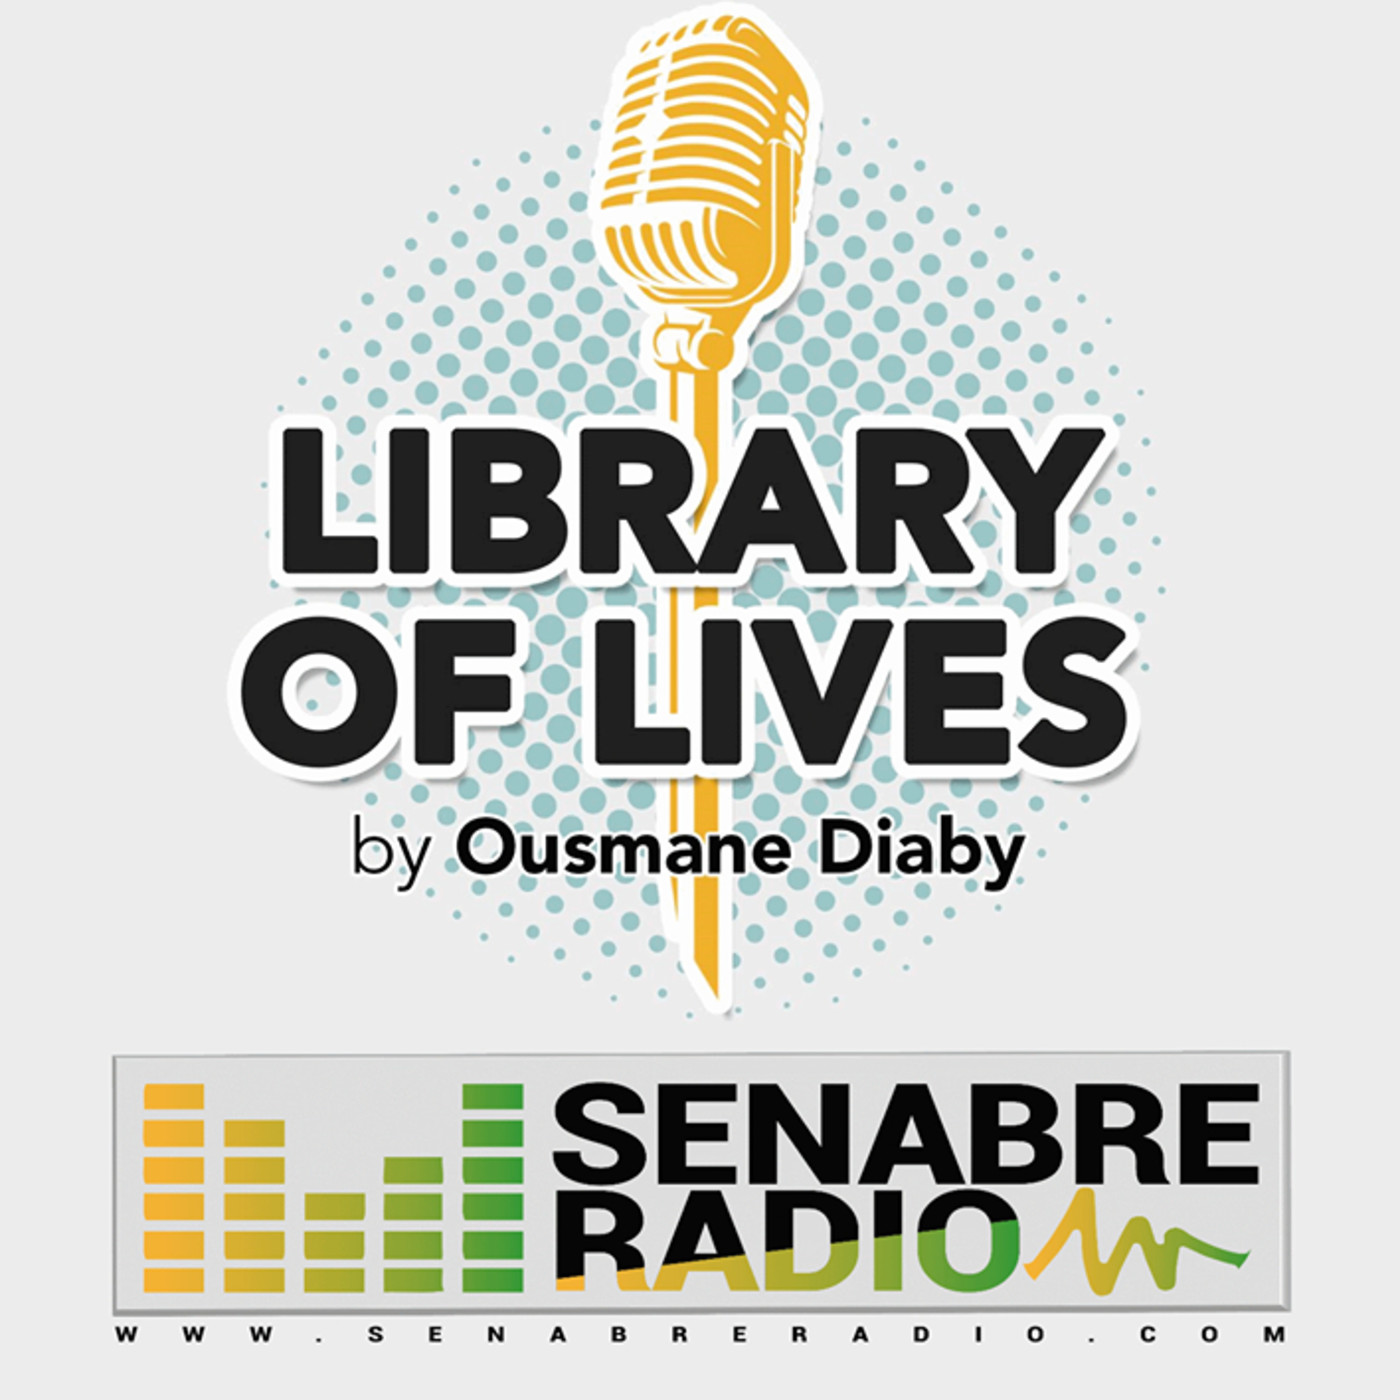 Library Of Lives